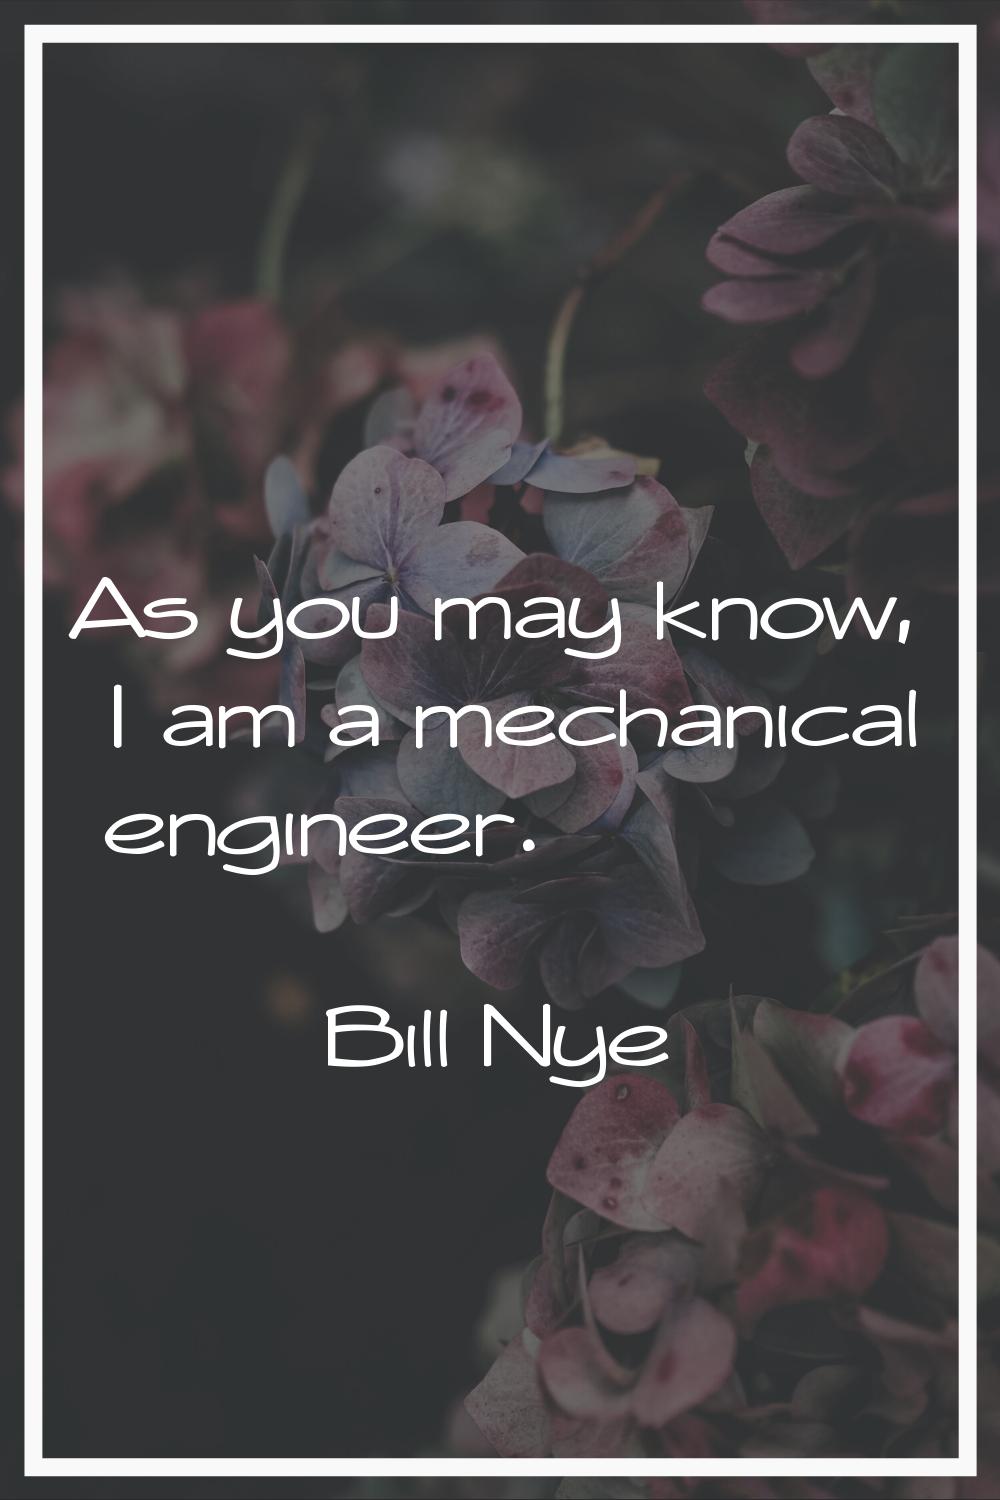 As you may know, I am a mechanical engineer.